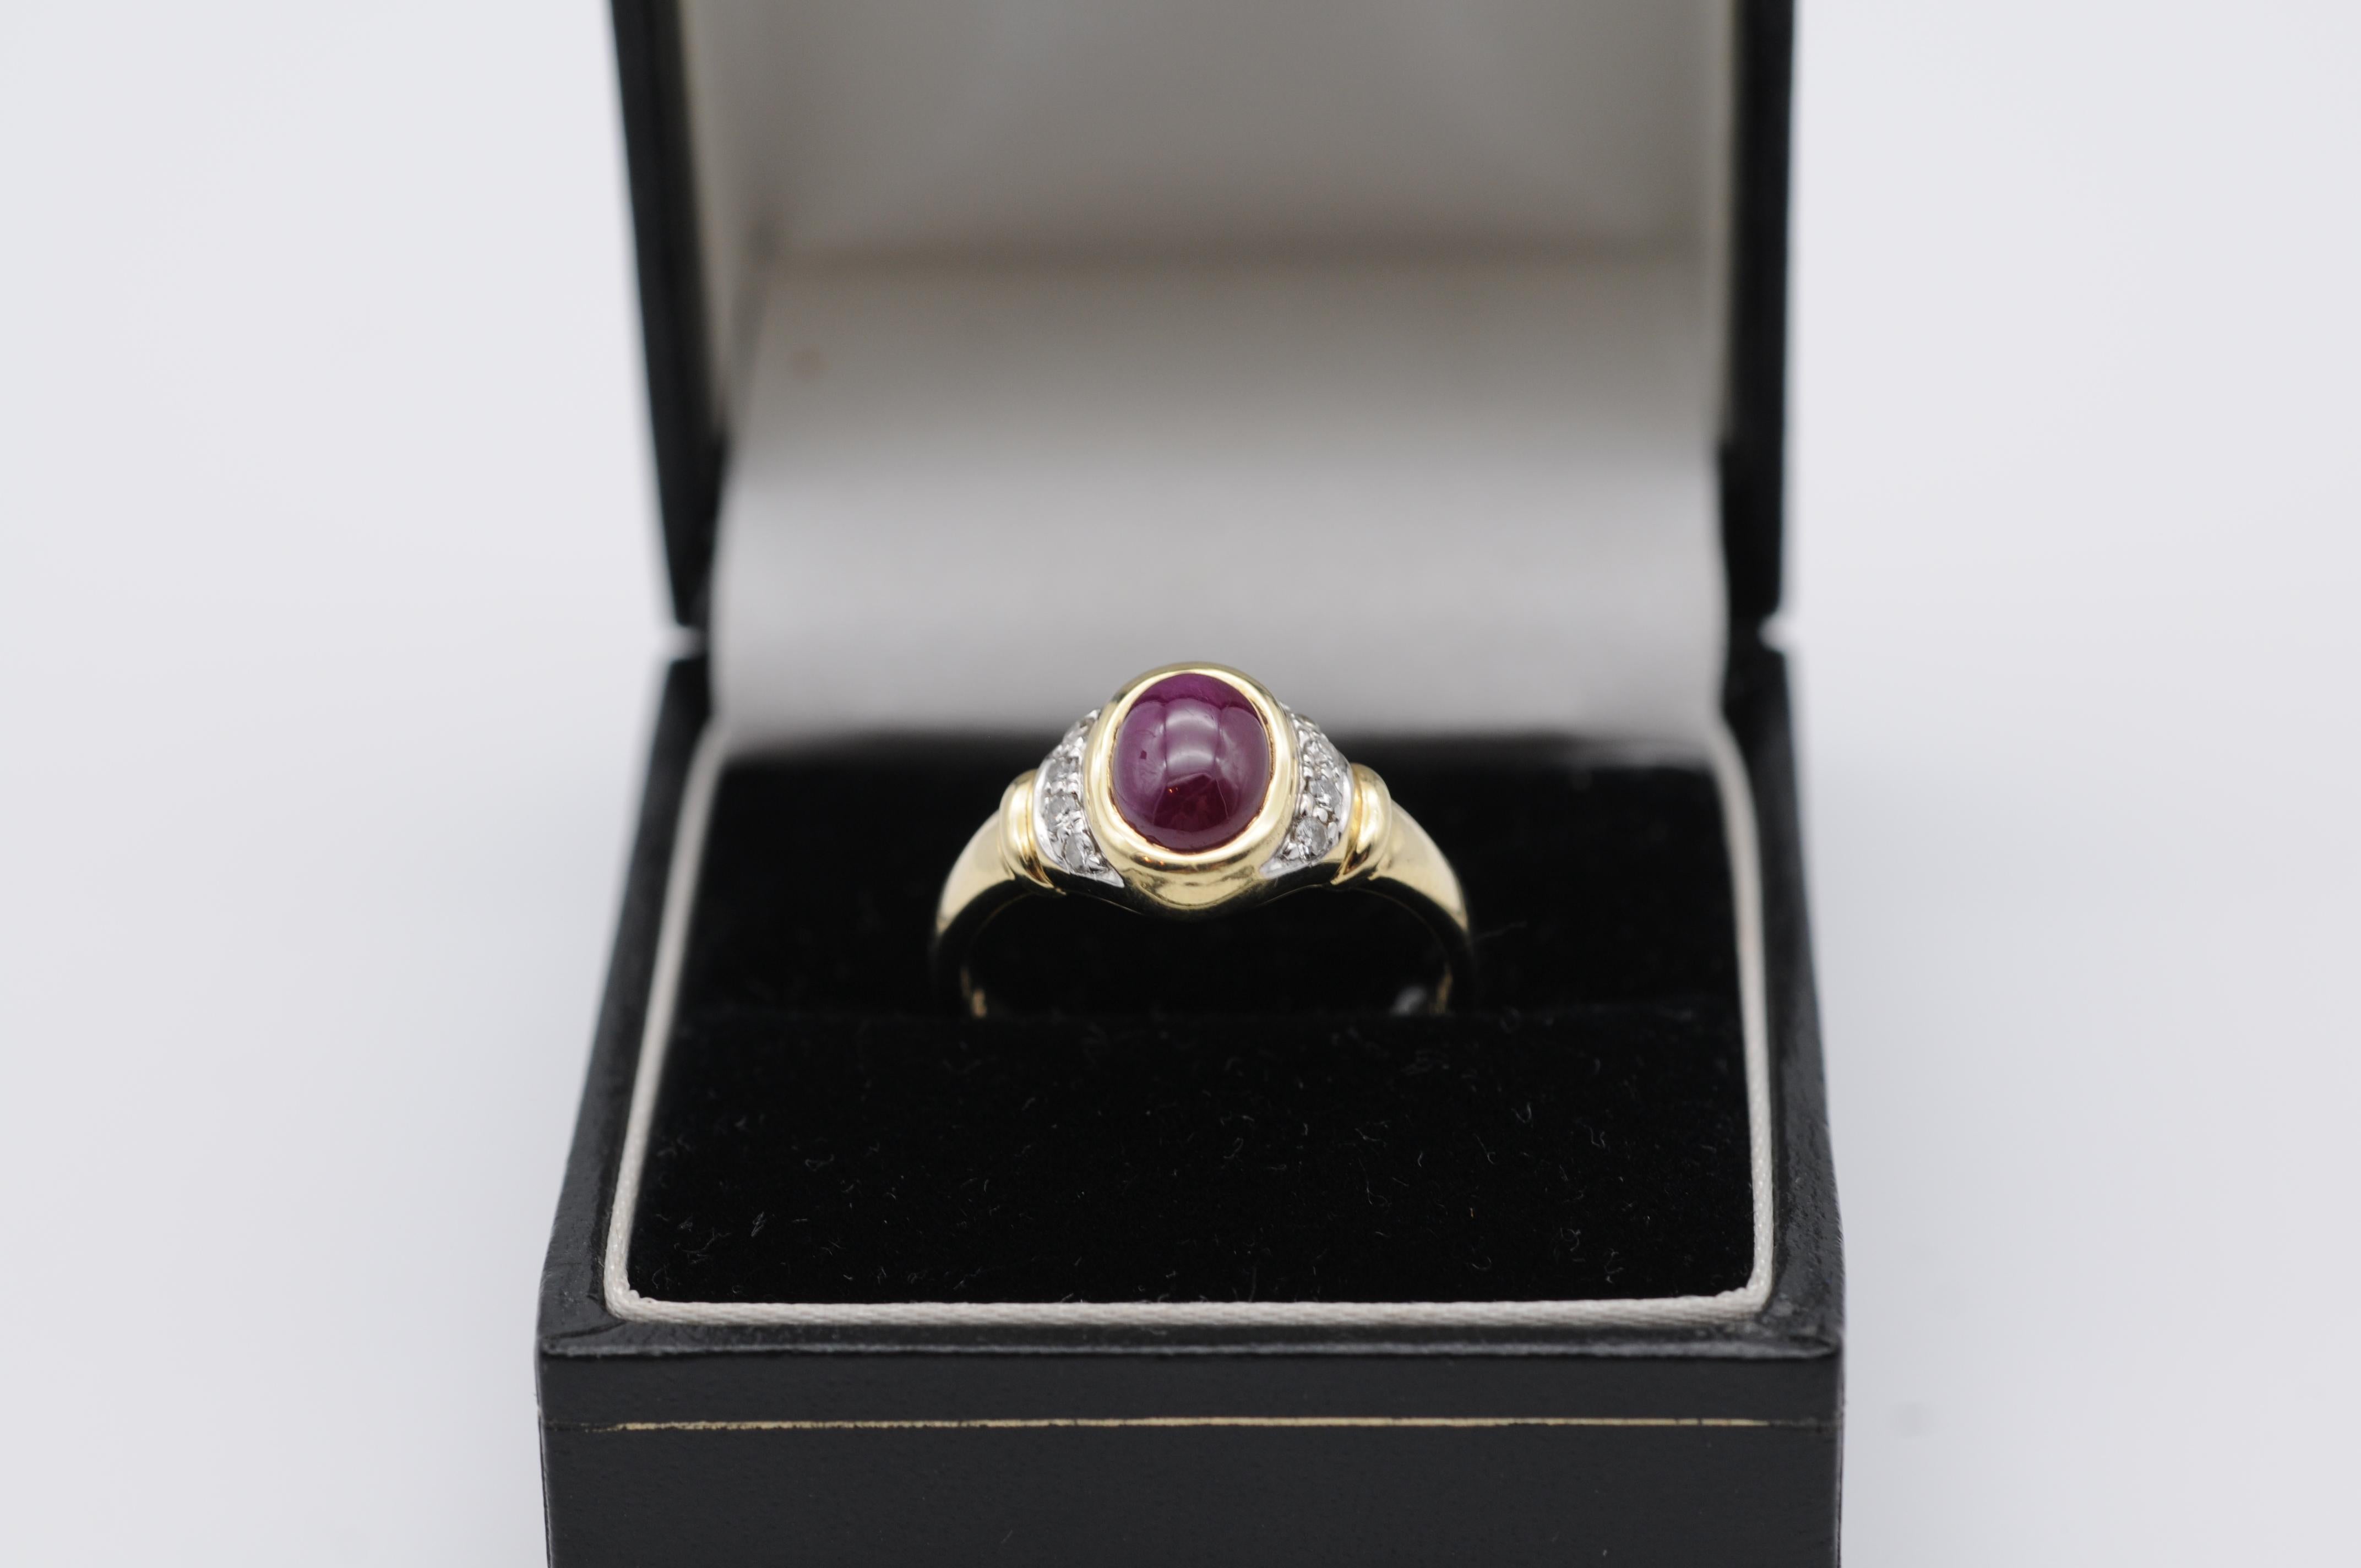 This 14K yellow gold ring is a stunning example of timeless elegance and refined taste. The central red cabochon stone is flawlessly set, radiating a deep and intense color that glows from within. Expertly crafted with precision and attention to